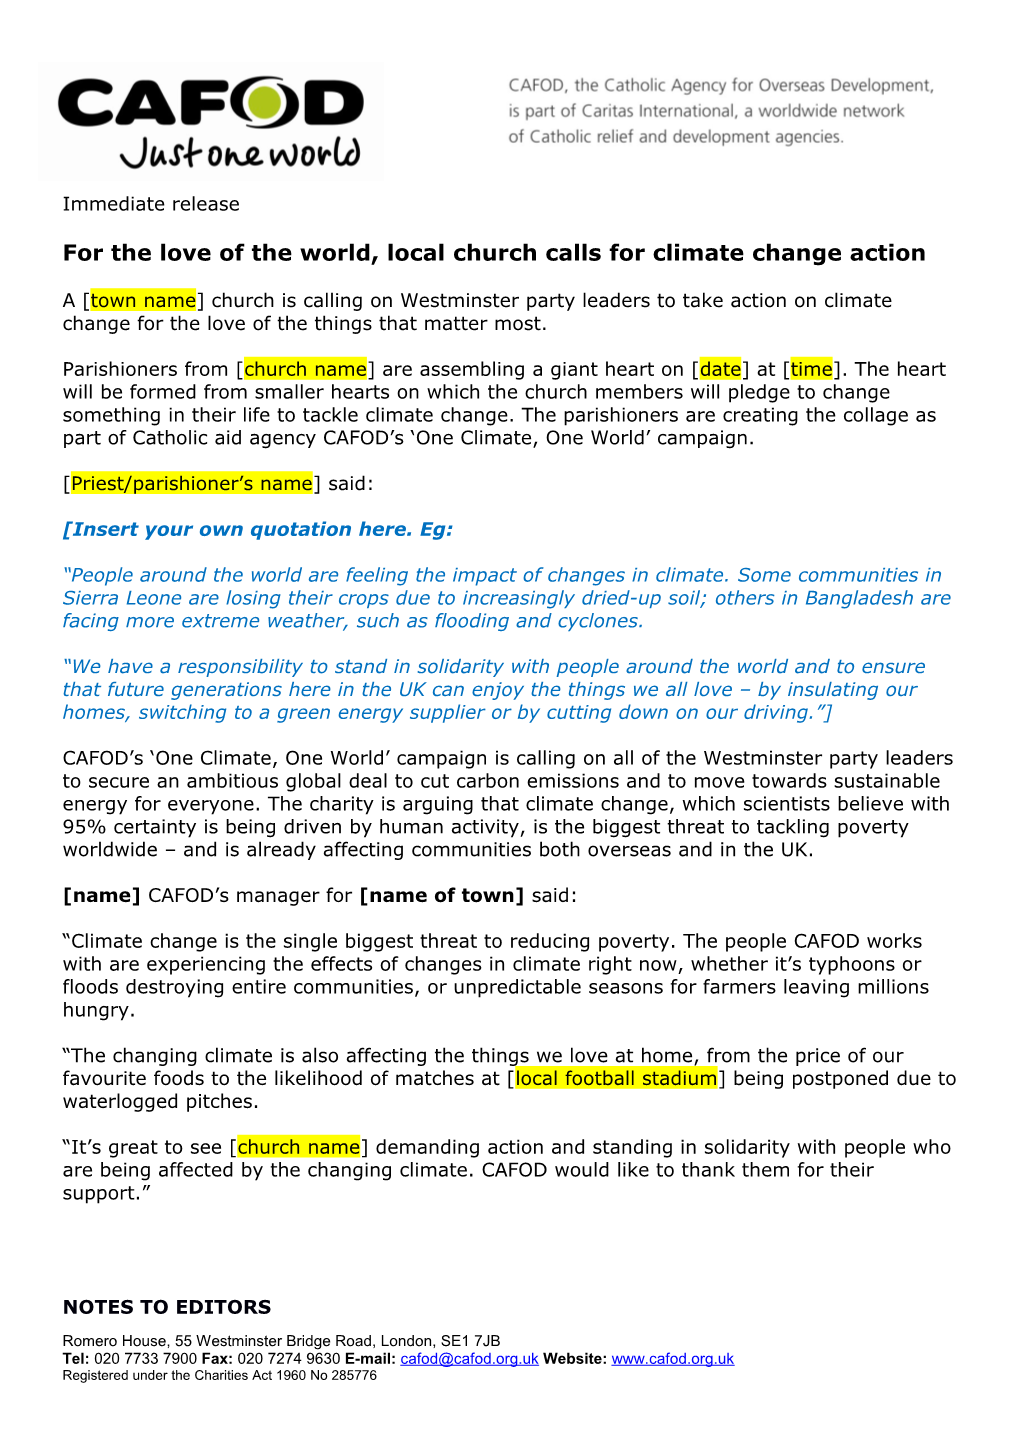 For the Love of the World, Local Church Calls for Climate Change Action